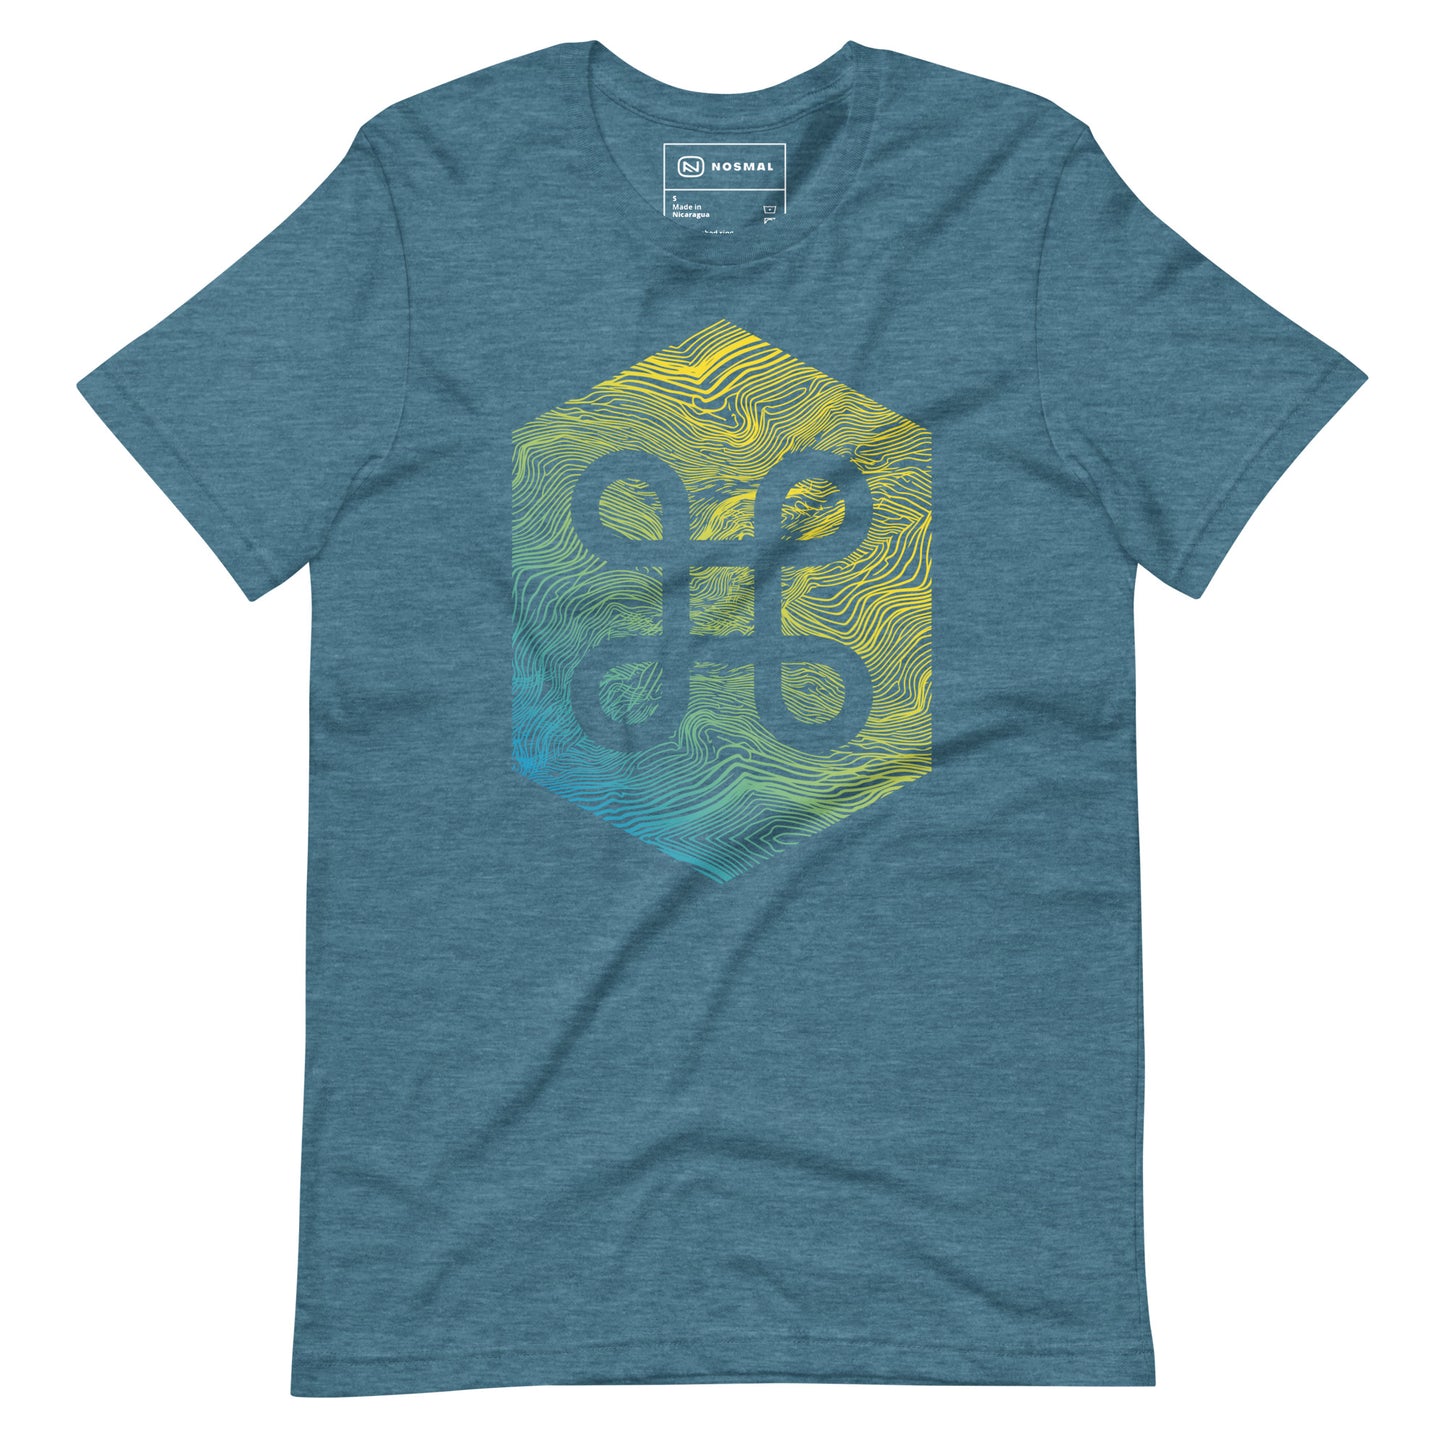 Straight on view of the commander gradient design on heather deep teal unisex t-shirt.